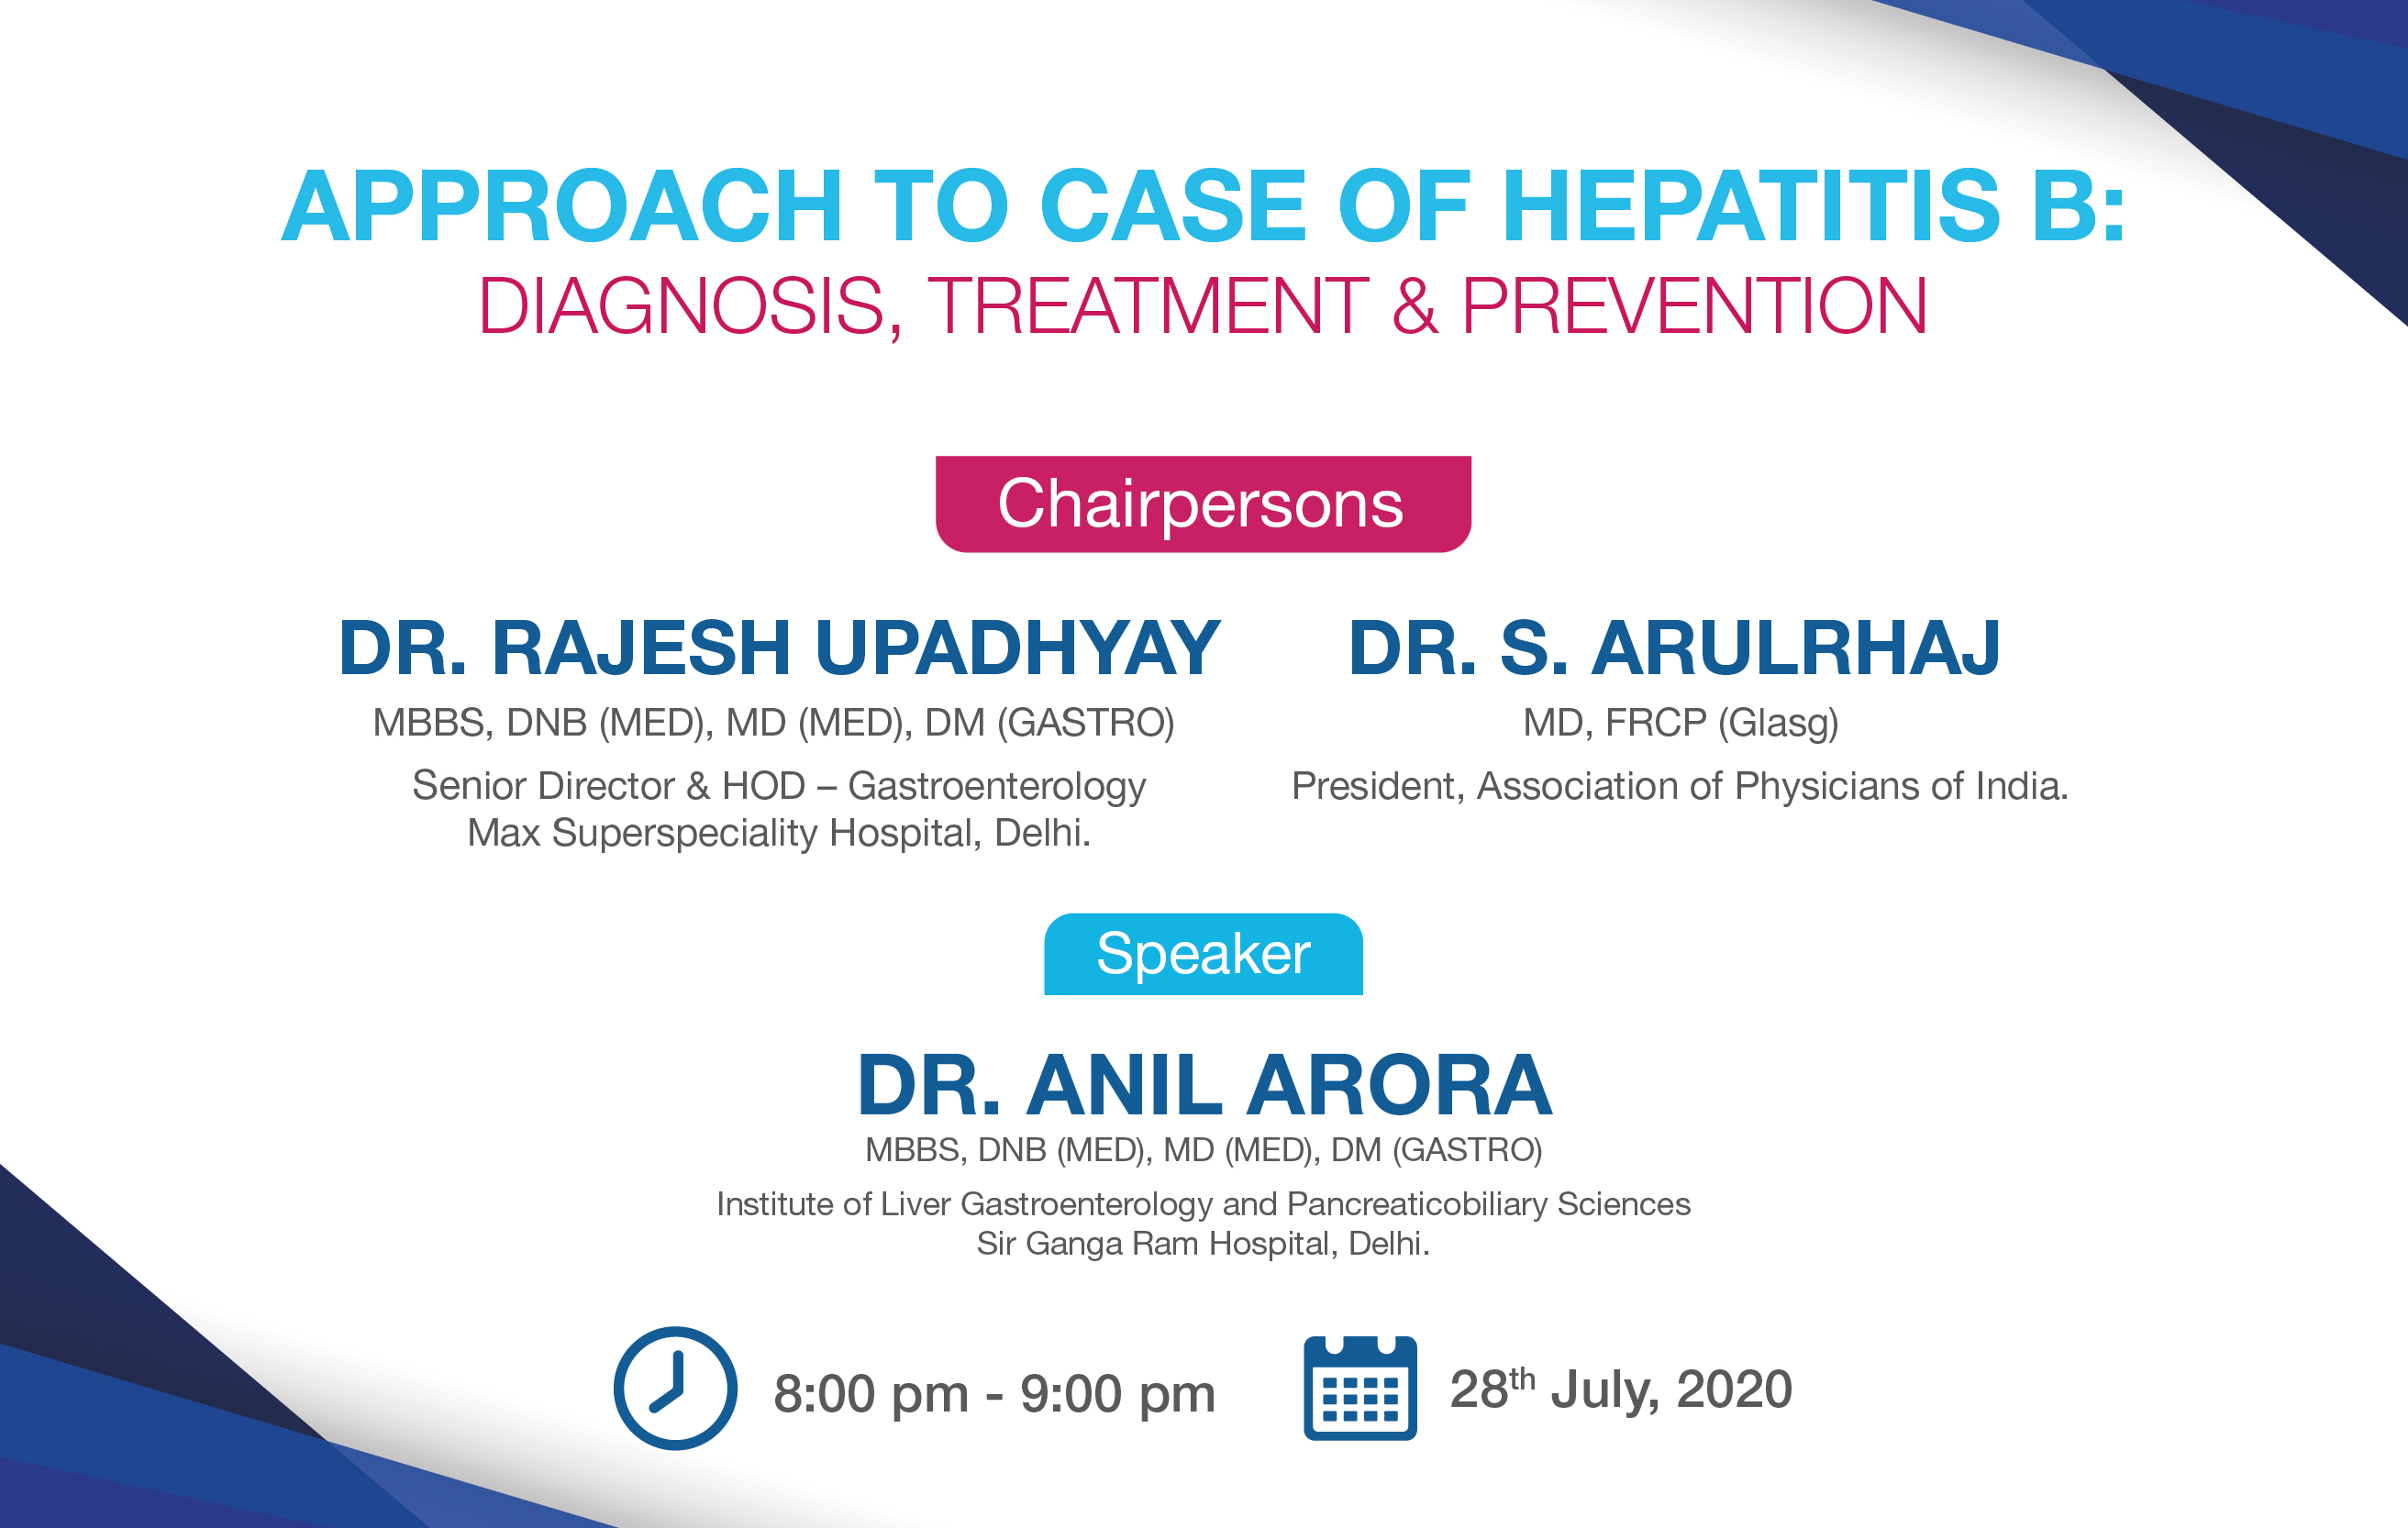 Approach to case of Hepatitis B: Diagnosis, Treatment & Prevention